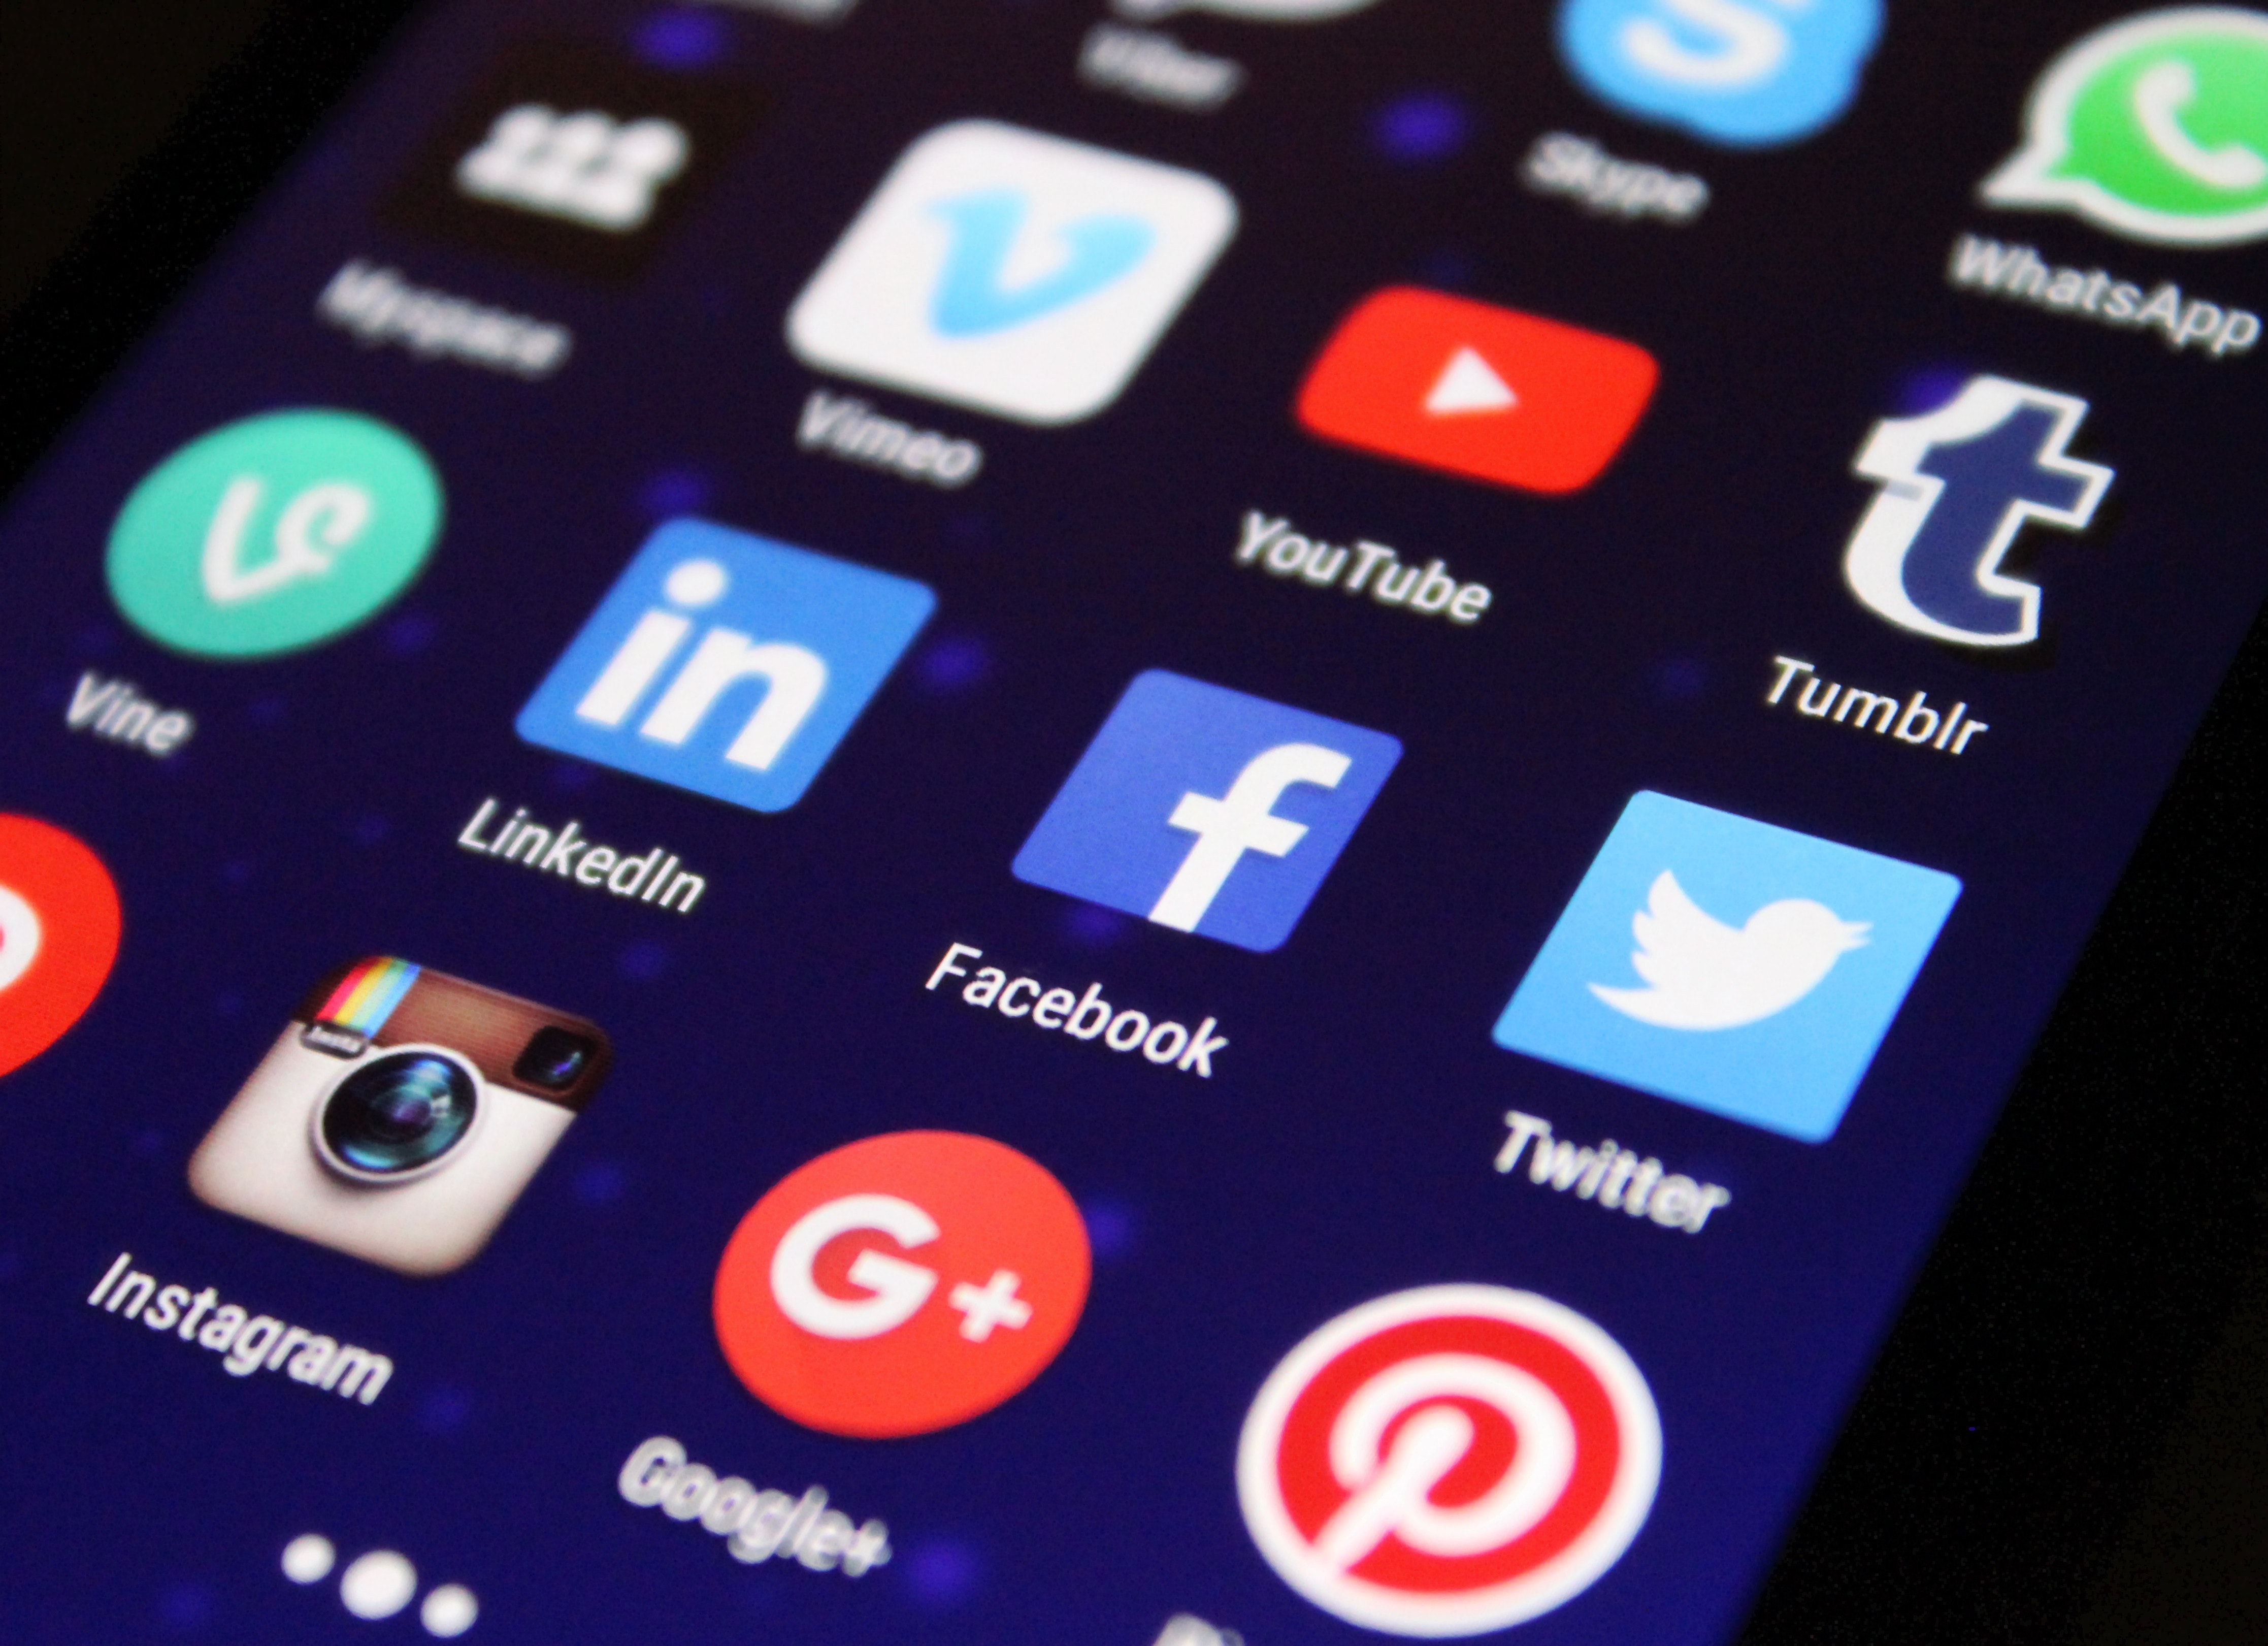 THE USE OF SOCIAL MEDIA WHEN LOOKING FOR A NEW ROLE